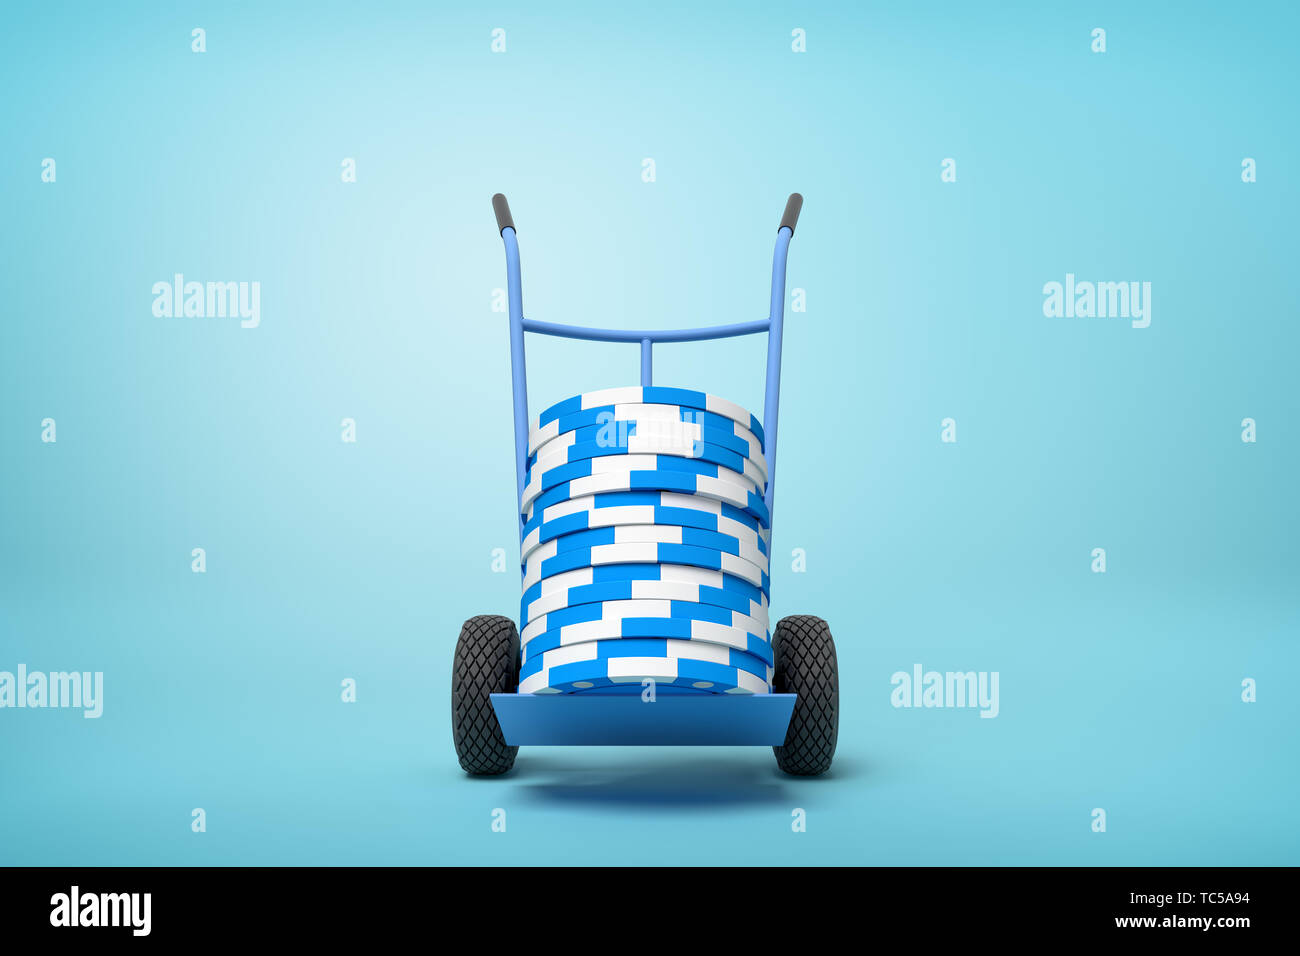 3d rendering of stack of blue and white poker chips on blue hand truck on light-blue background with copy space. Stock Photo